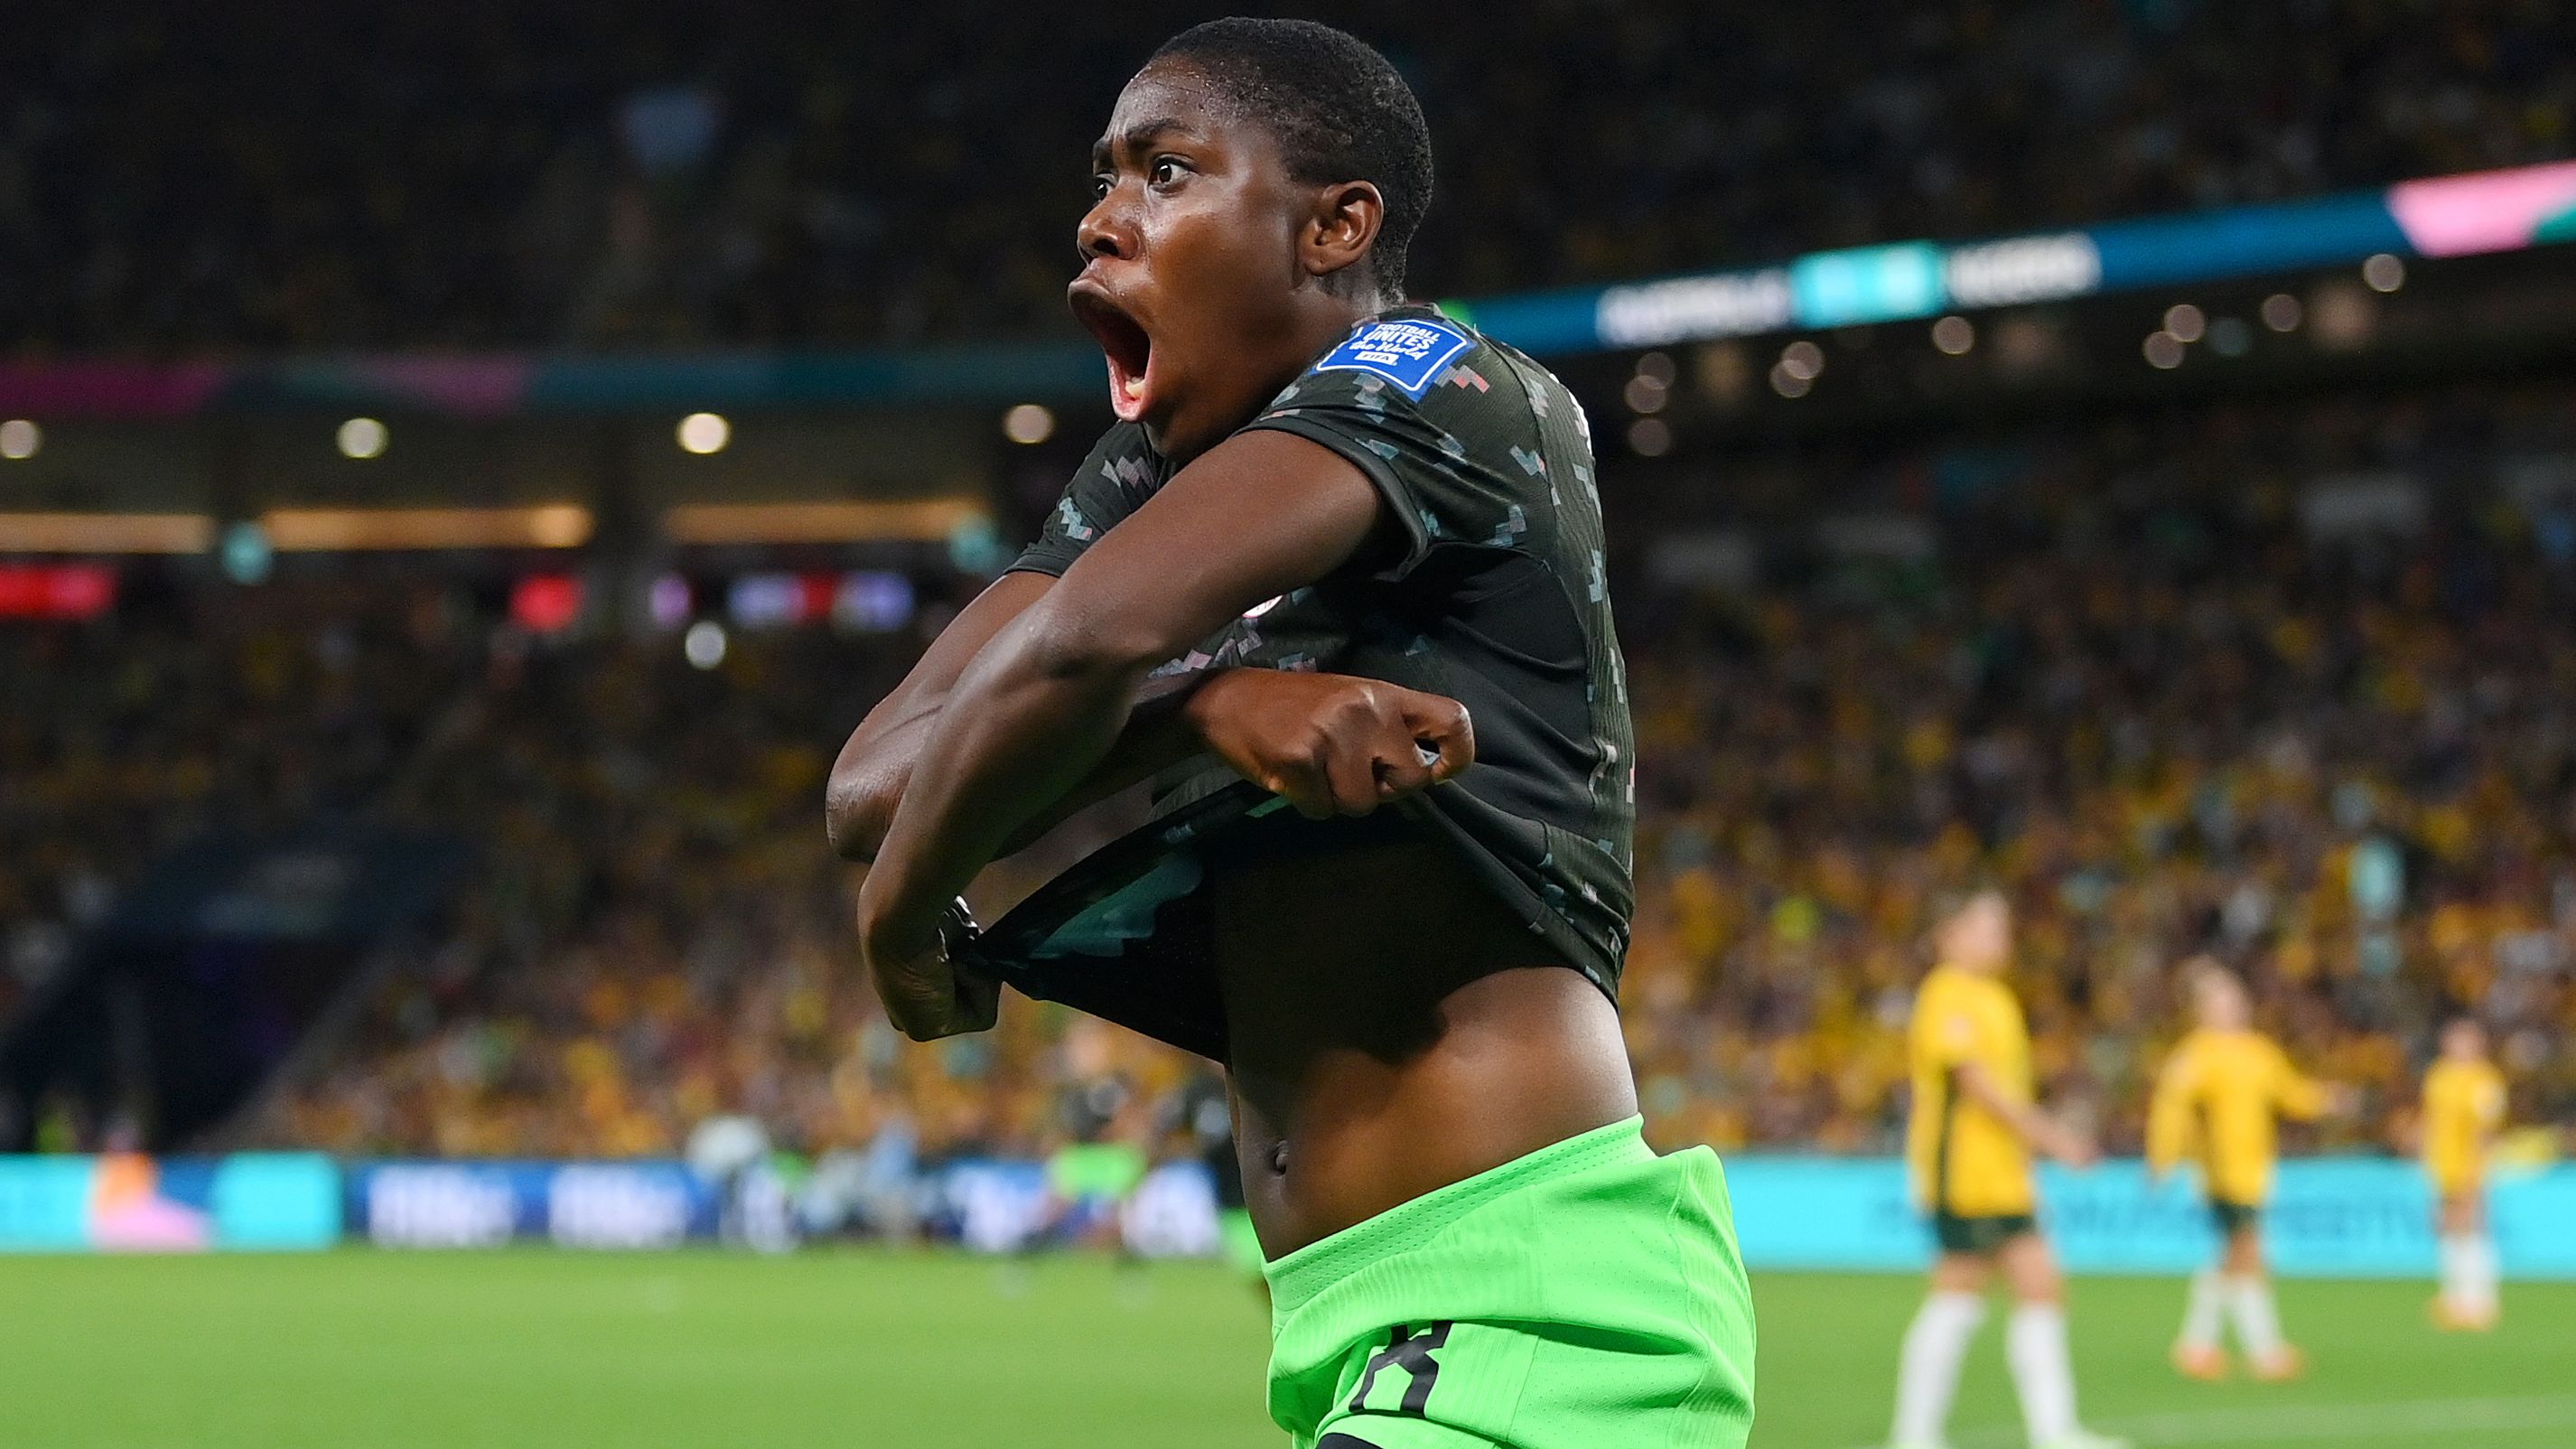 BRISBANE, AUSTRALIA - JULY 27: Asisat Oshoala of Nigeria celebrates after scoring her team&#x27;s third goal during the FIFA Women&#x27;s World Cup Australia &amp; New Zealand 2023 Group B match between Australia and Nigeria at Brisbane Stadium on July 27, 2023 in Brisbane, Australia. (Photo by Justin Setterfield/Getty Images)